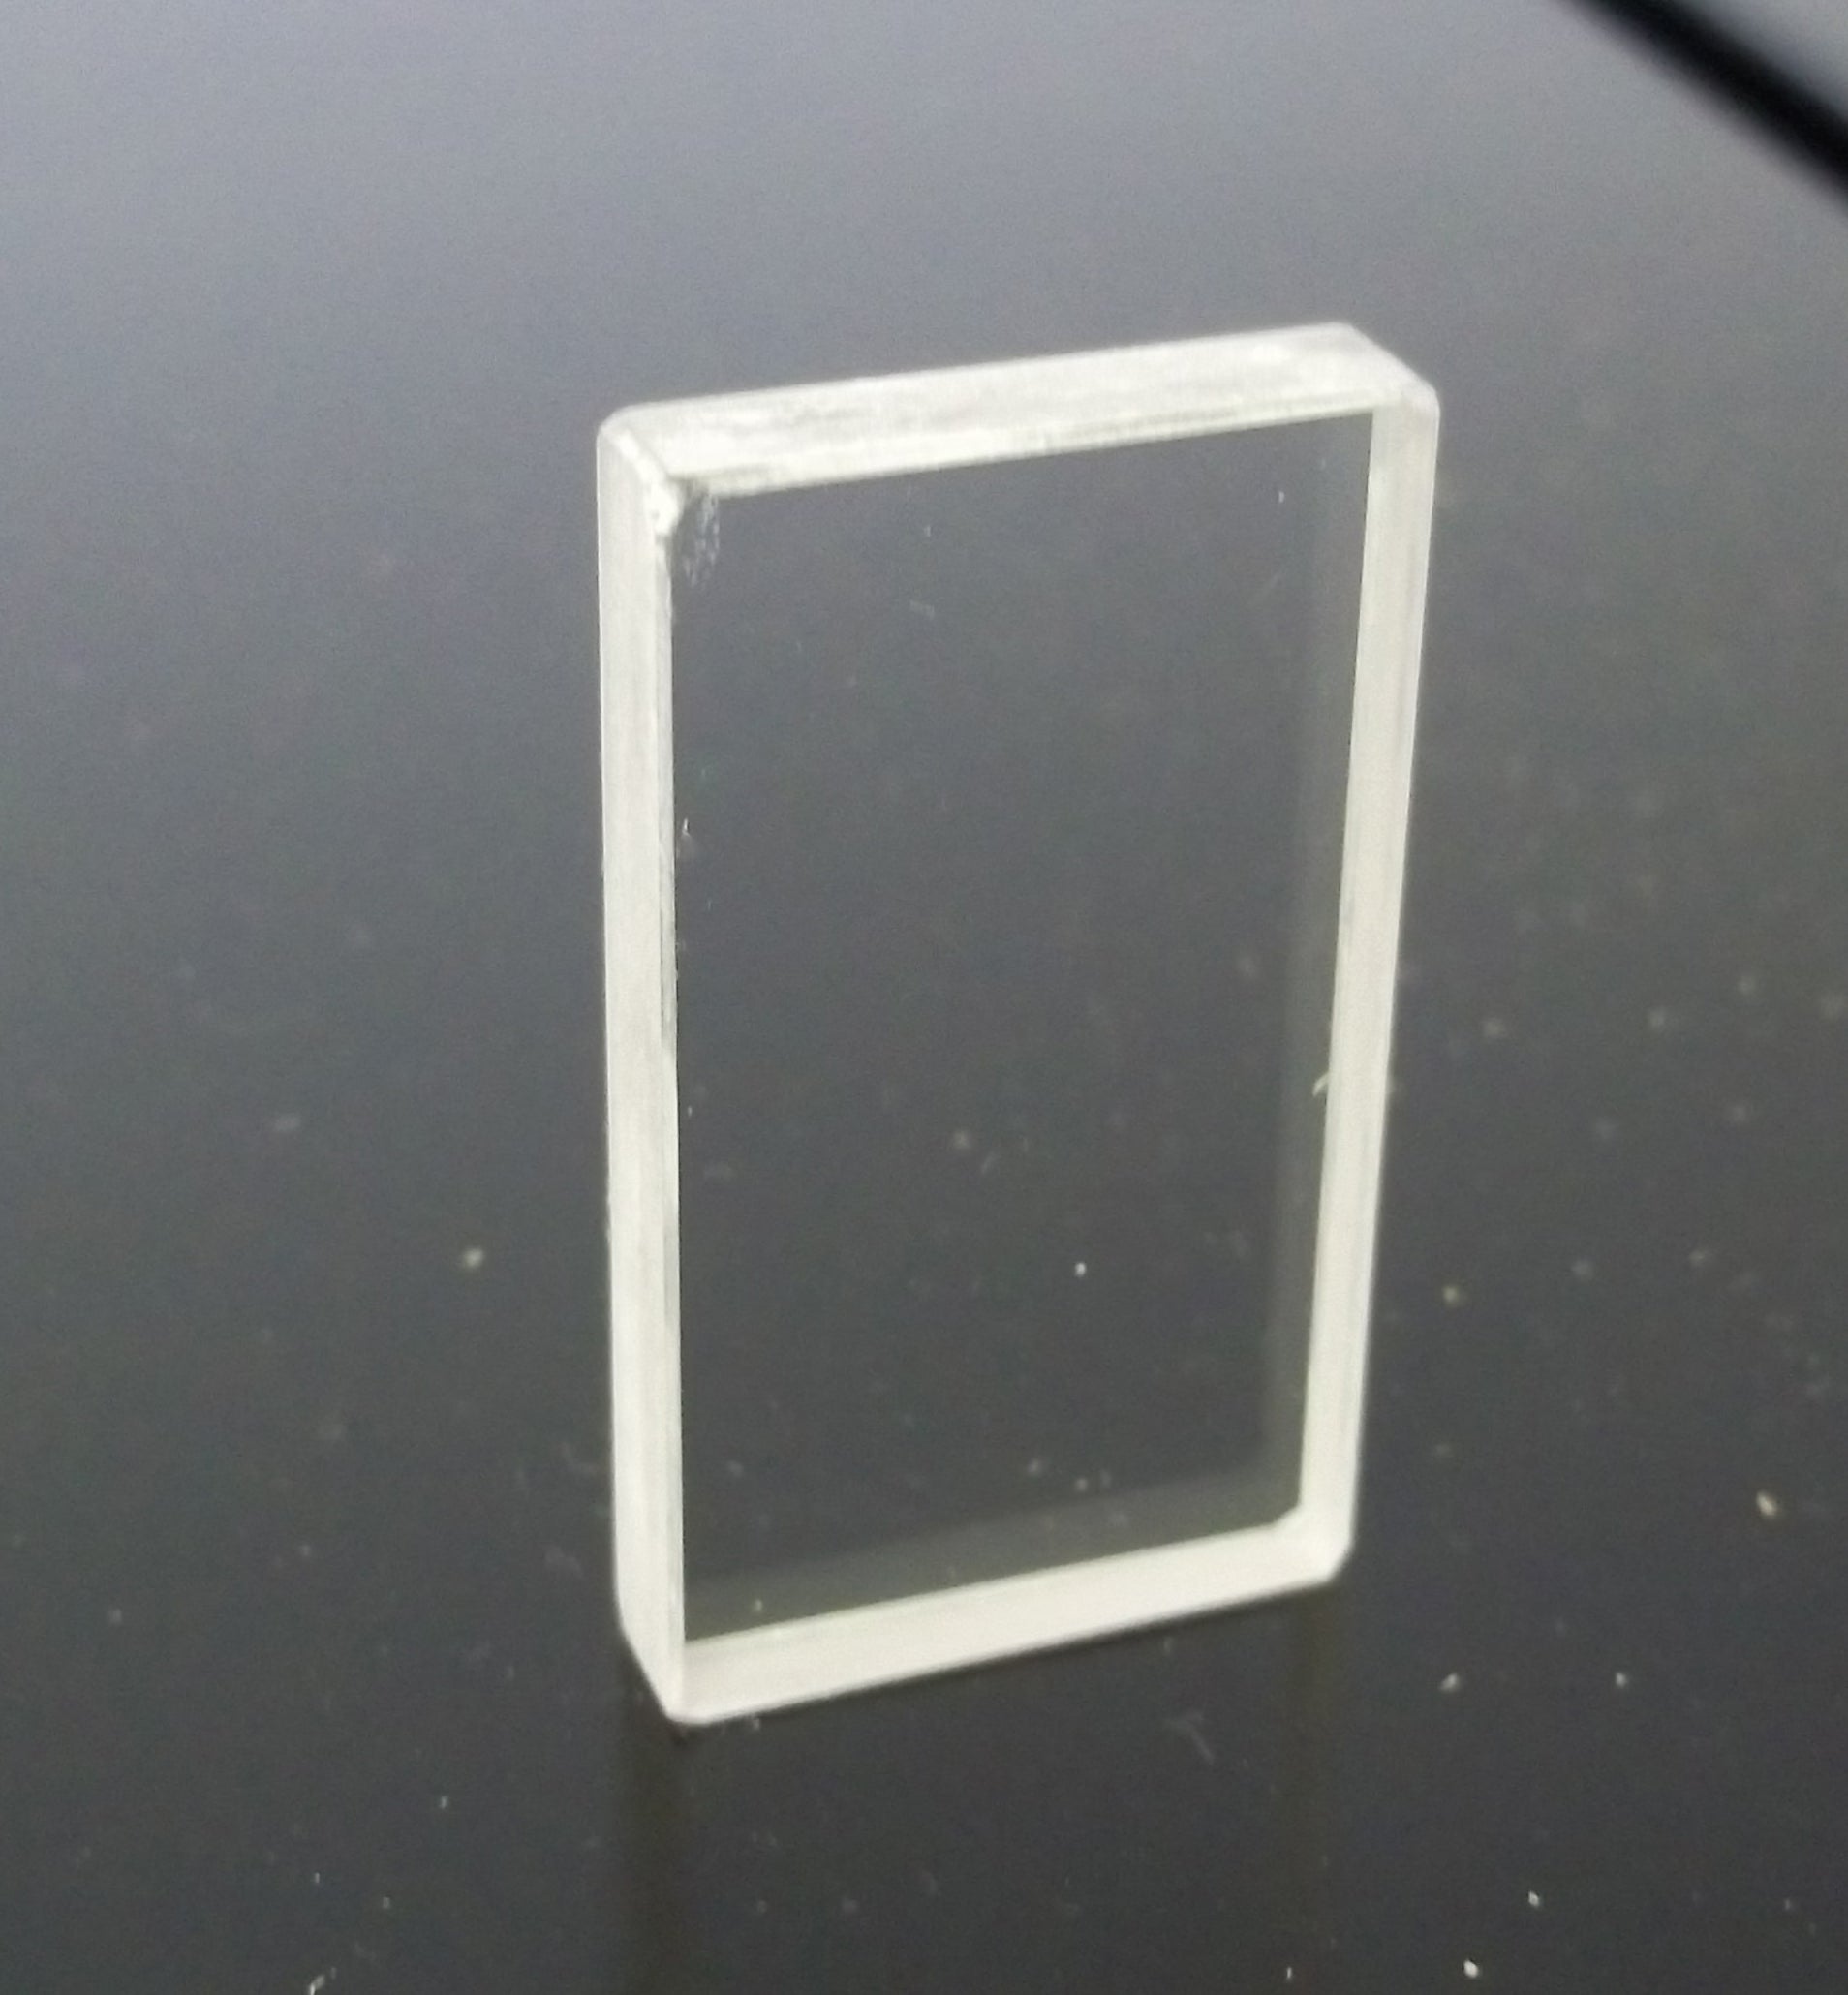 NaCl (Sodium Chloride) 38x19x4mm Cell Window (Drilled)